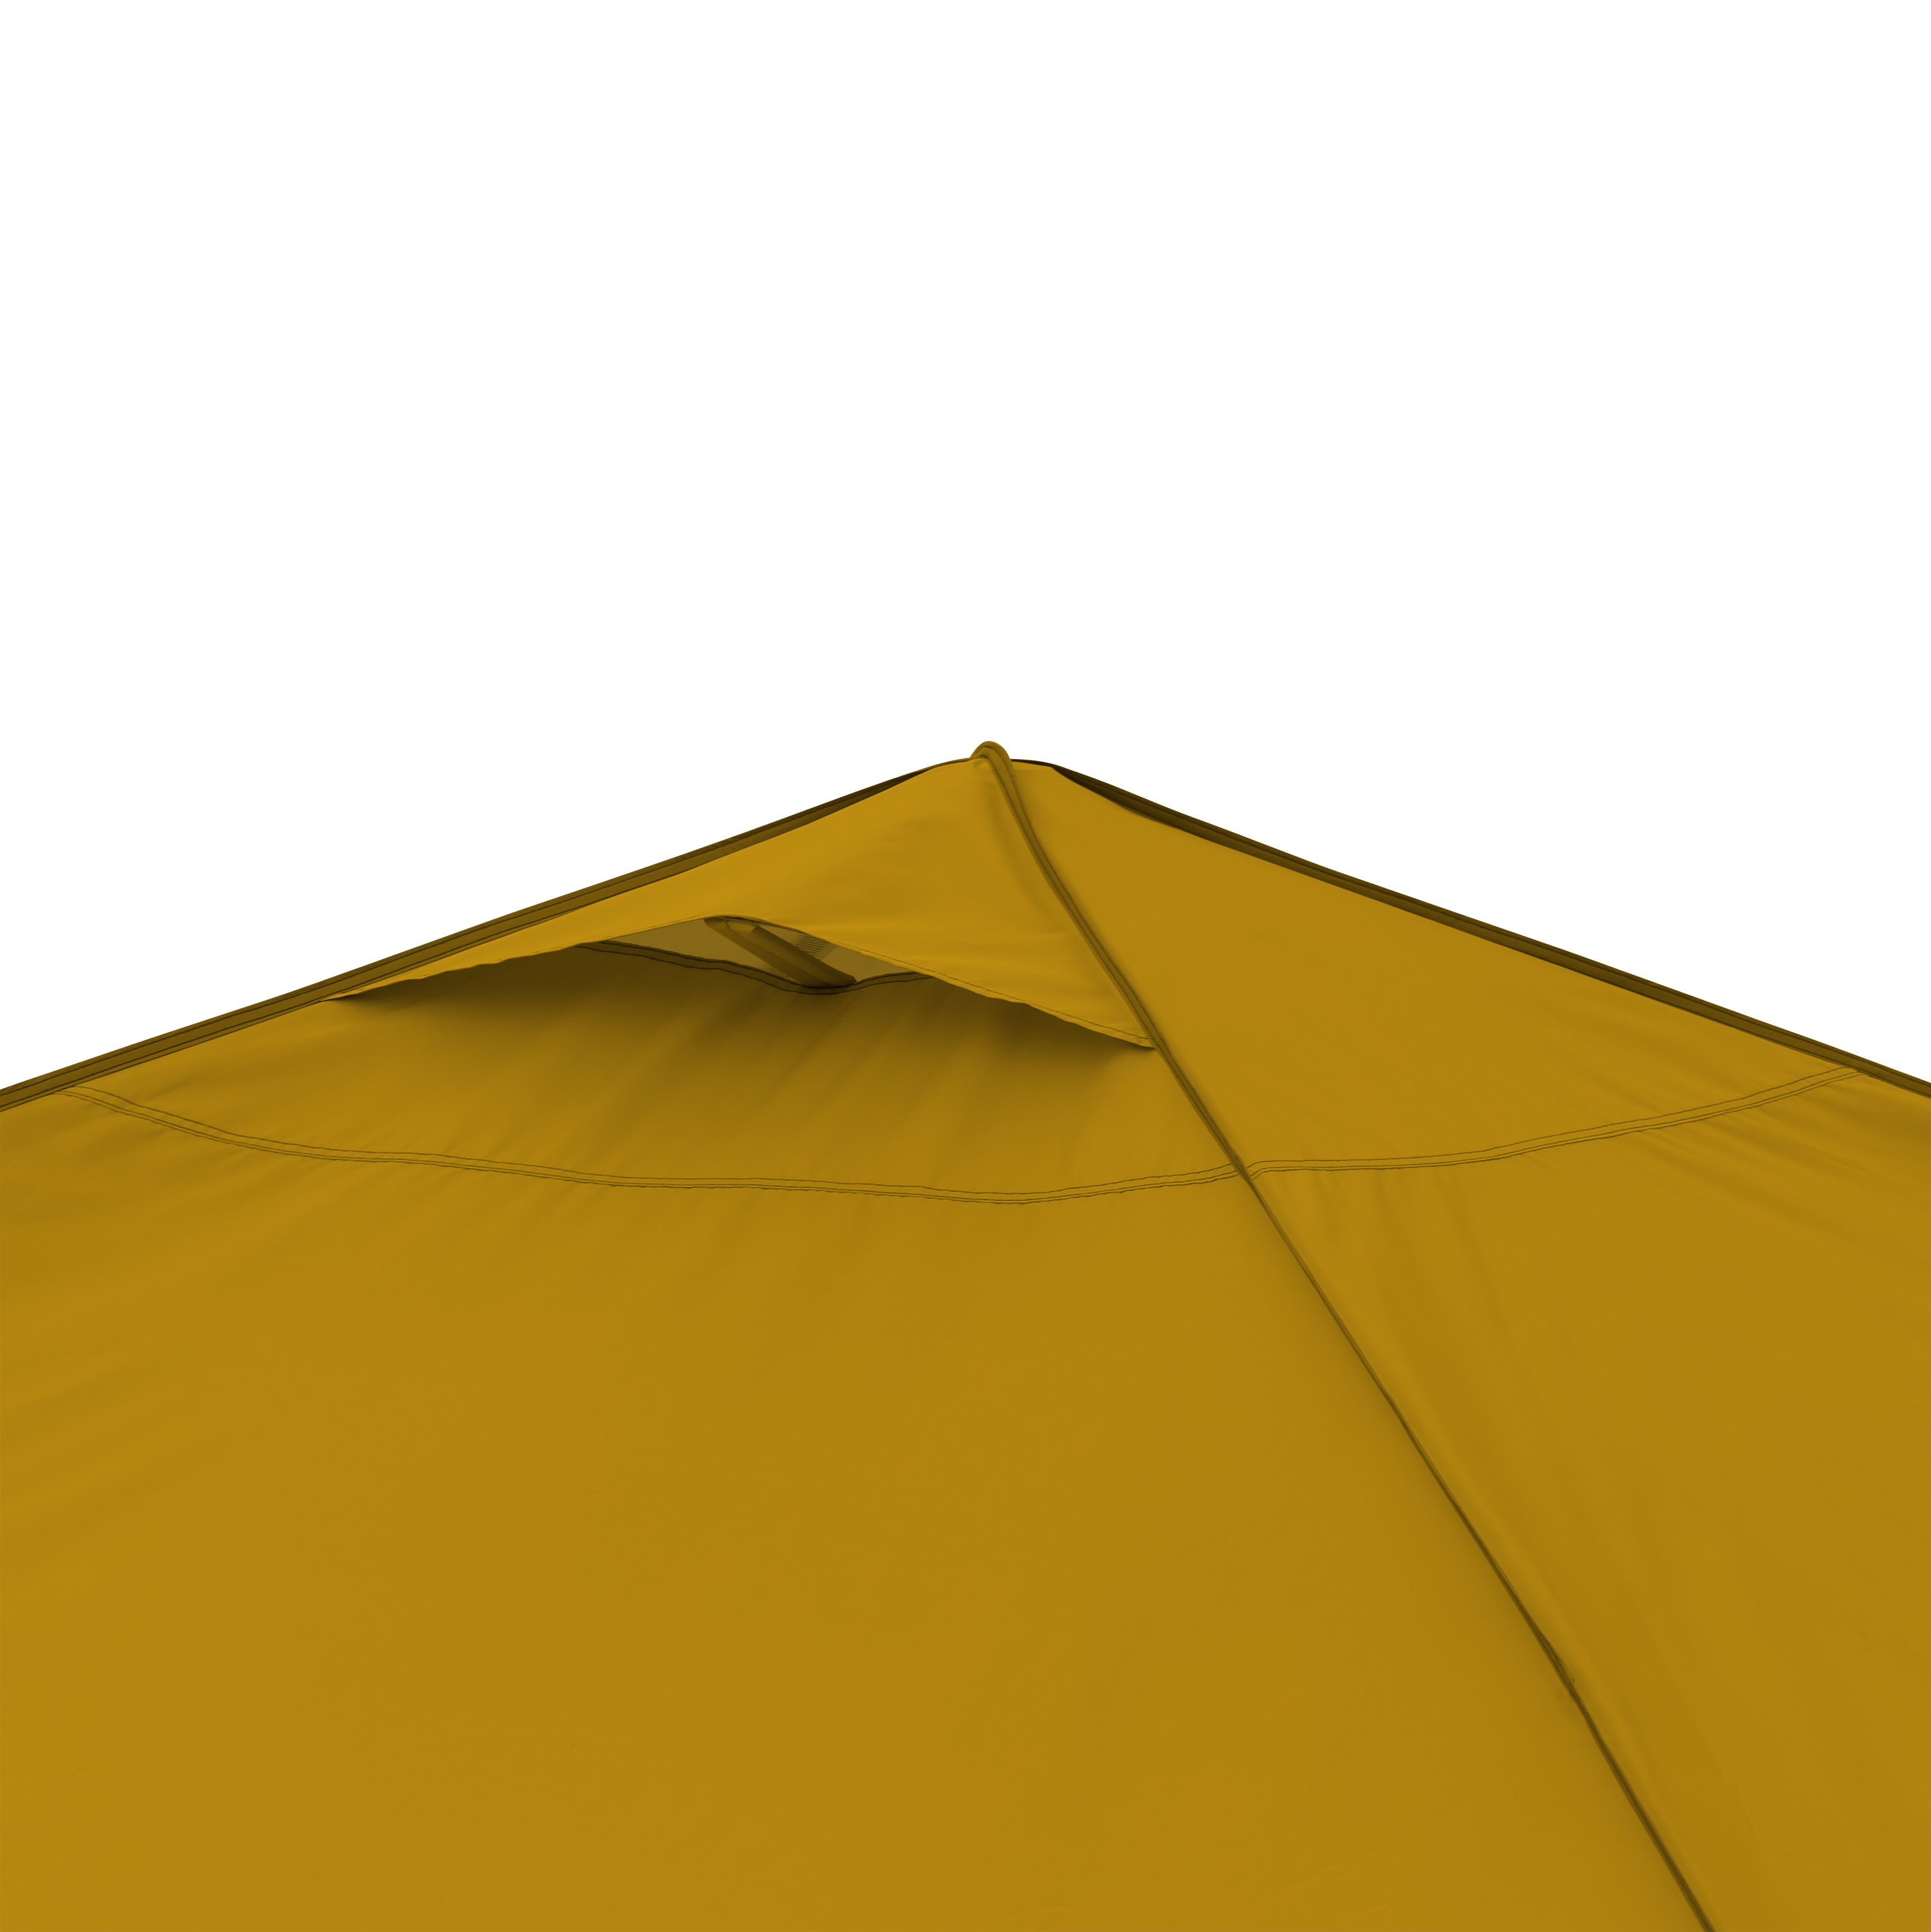 Ozark Trail 10' x 10' Yellow Instant Outdoor Canopy with UV Protection Material - image 5 of 5